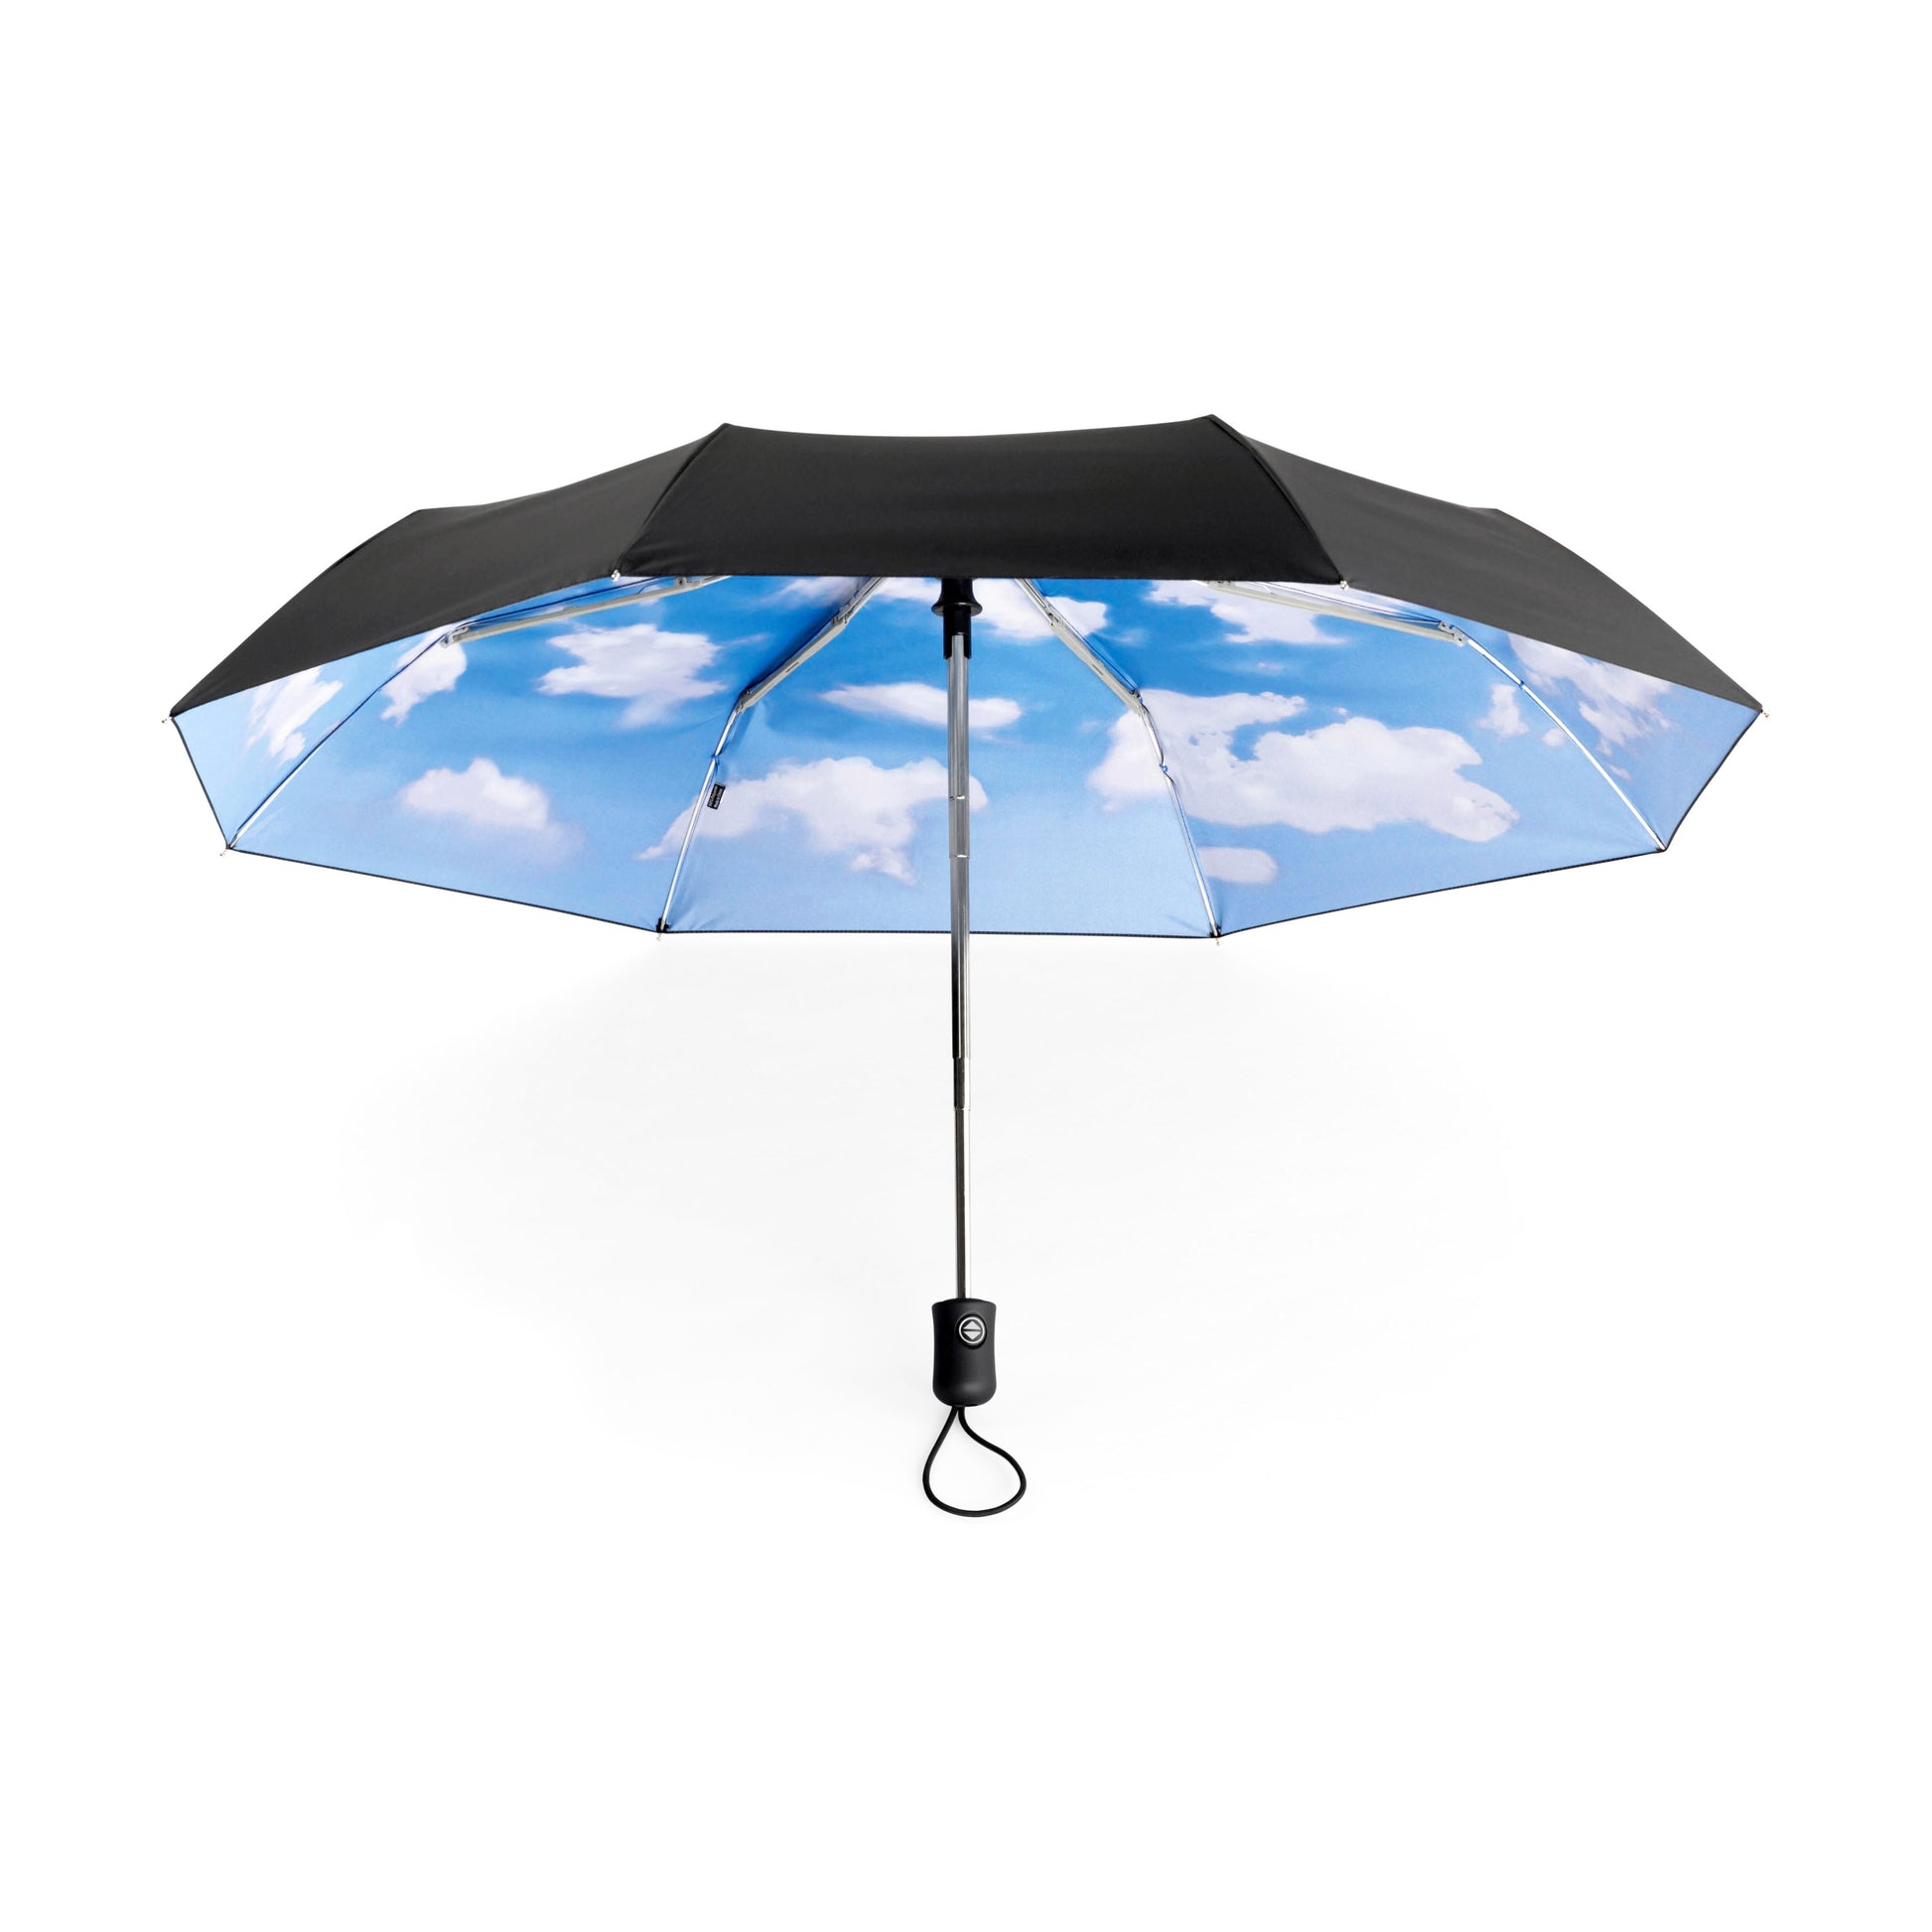 MoMA Sky folding umbrella made of recycled material